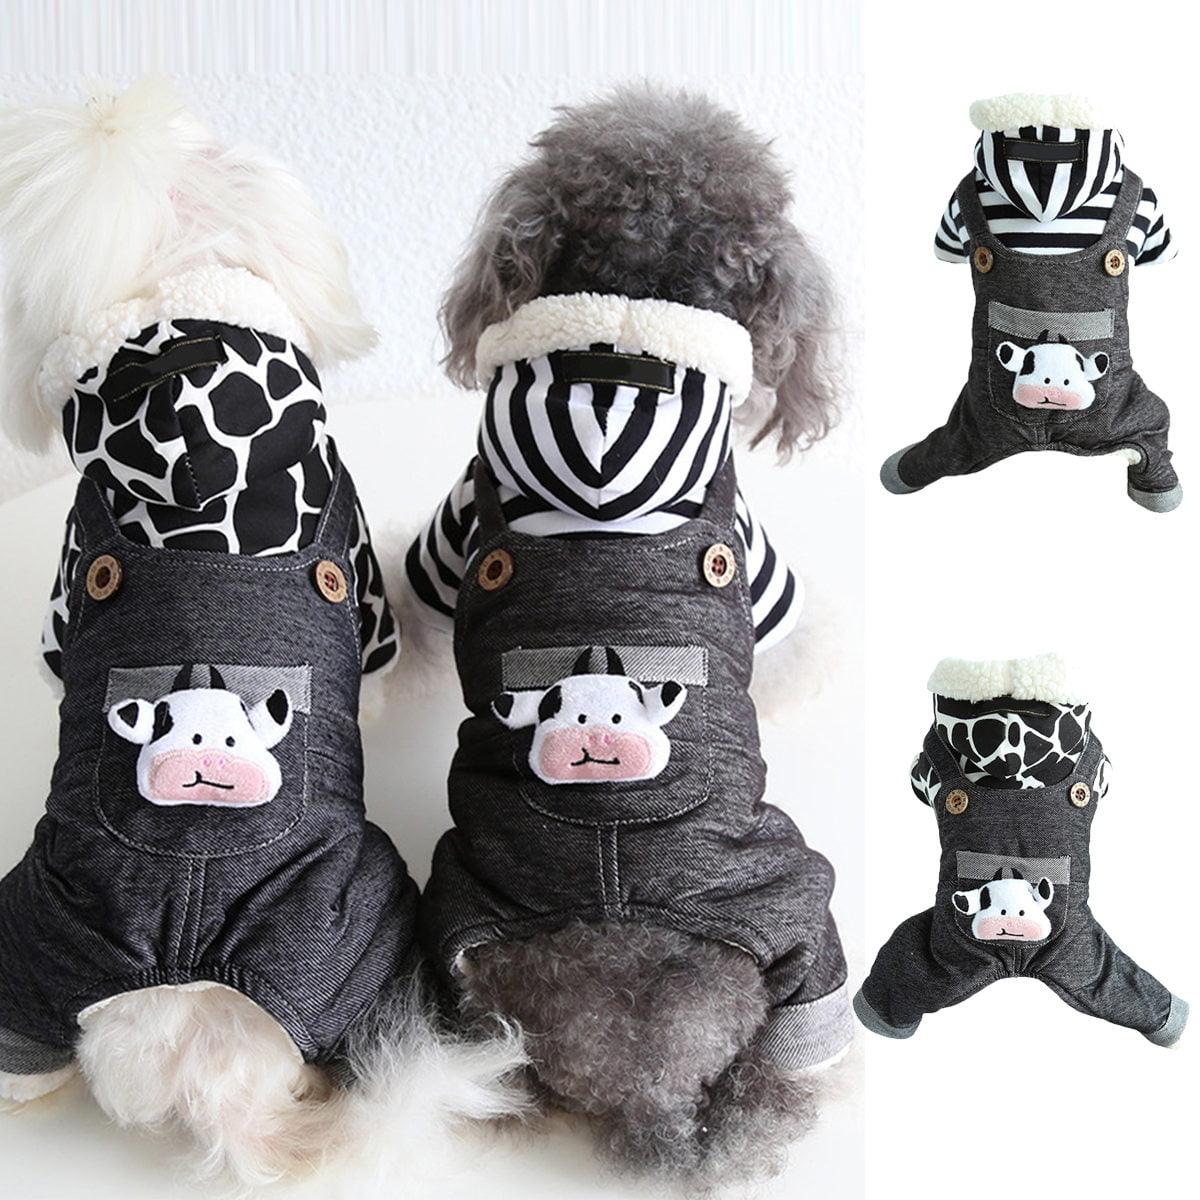 Meidiya Pet Denim Jumpsuit Dog Jeans Hoodies Cool Black White Coat Puppy Small Dogs Classic Jacket Puppy Vintage Overalls with Pocket 8fc7423f aa09 4c98 82ce 70e31de0f334.0d3e1e2f5d610b52af2e690af6d89da1